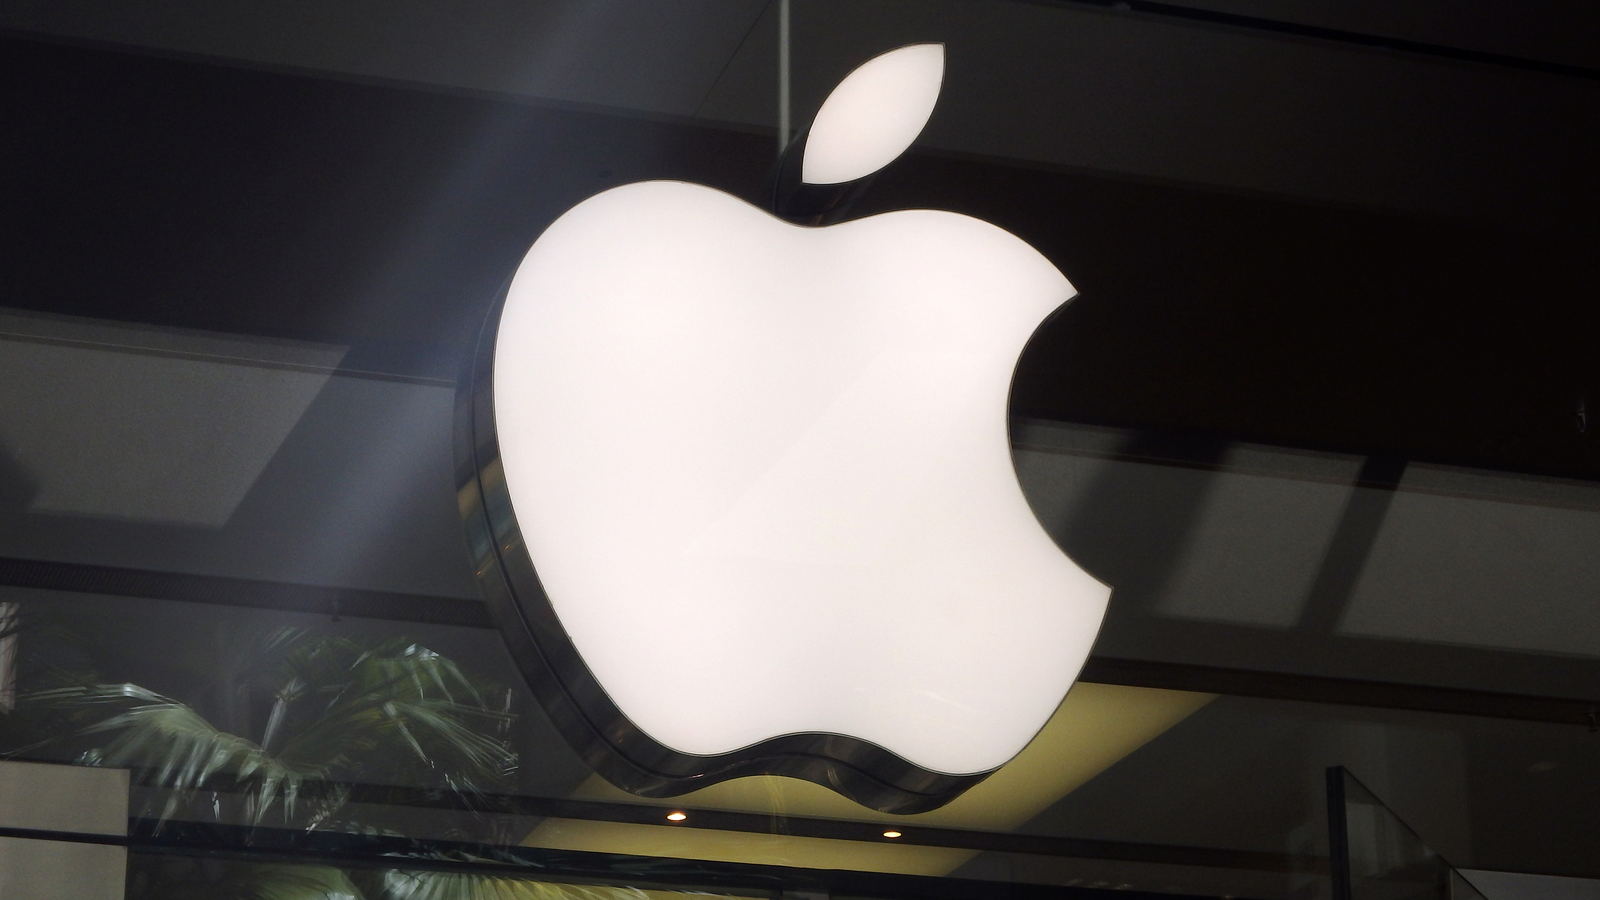 Apple Car: It's Time to Prepare for the Next Big Apple Product Launch